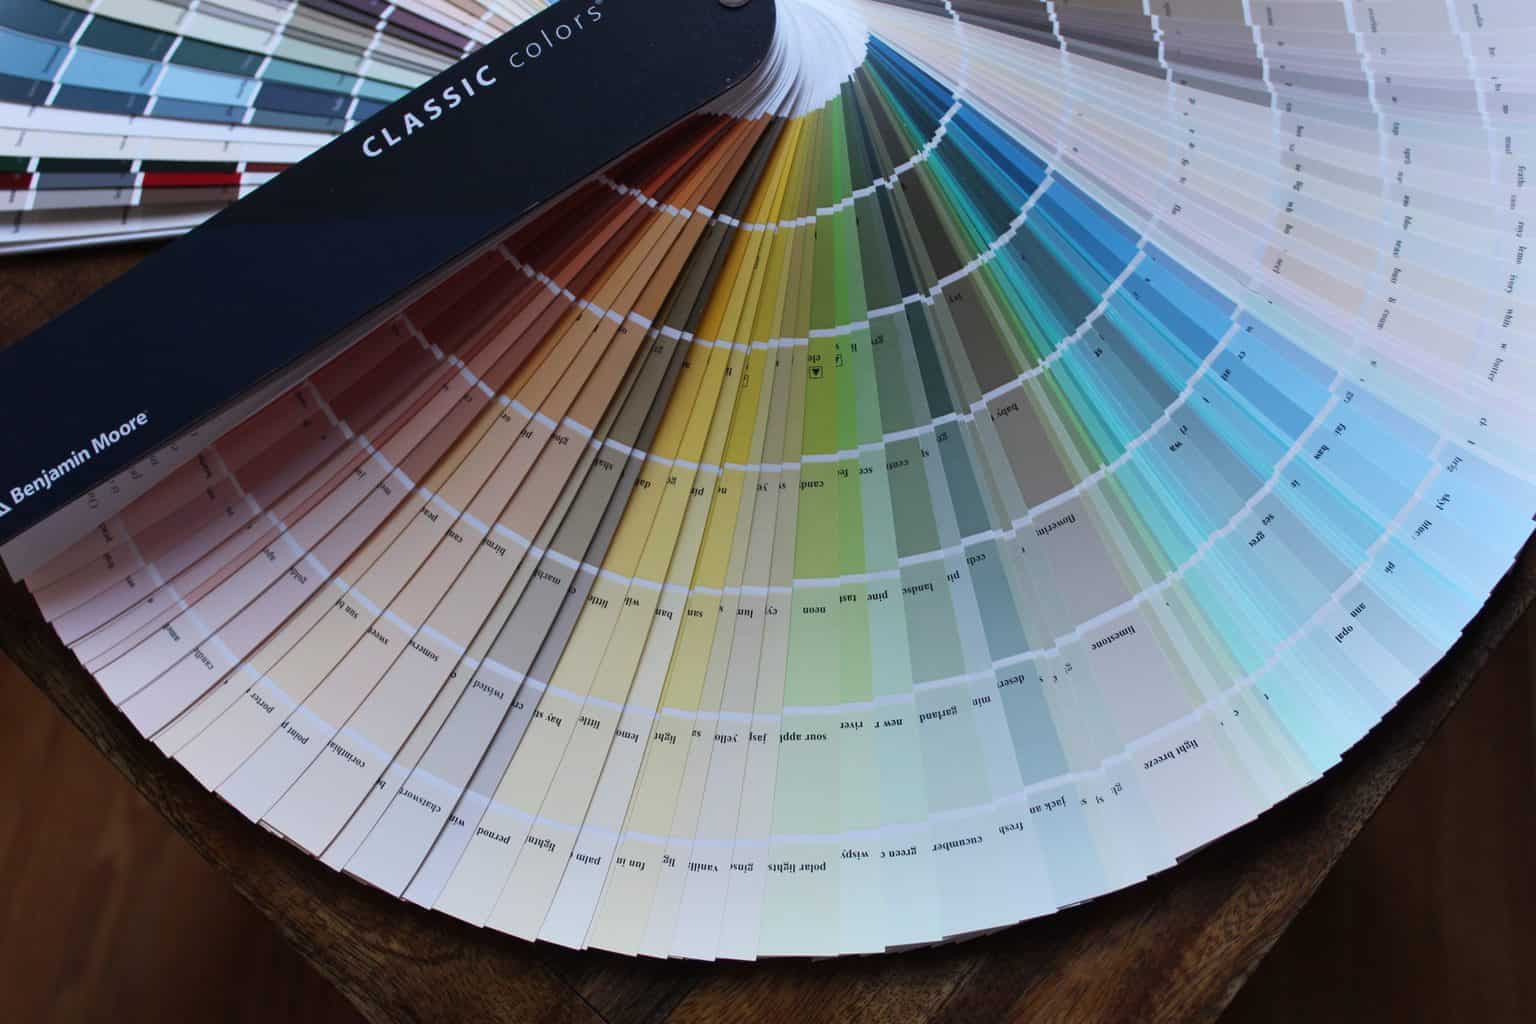 Picking the right paint color can be stressful, but I am sharing easy tips on How To Pick The Right Paint Color Every Time.